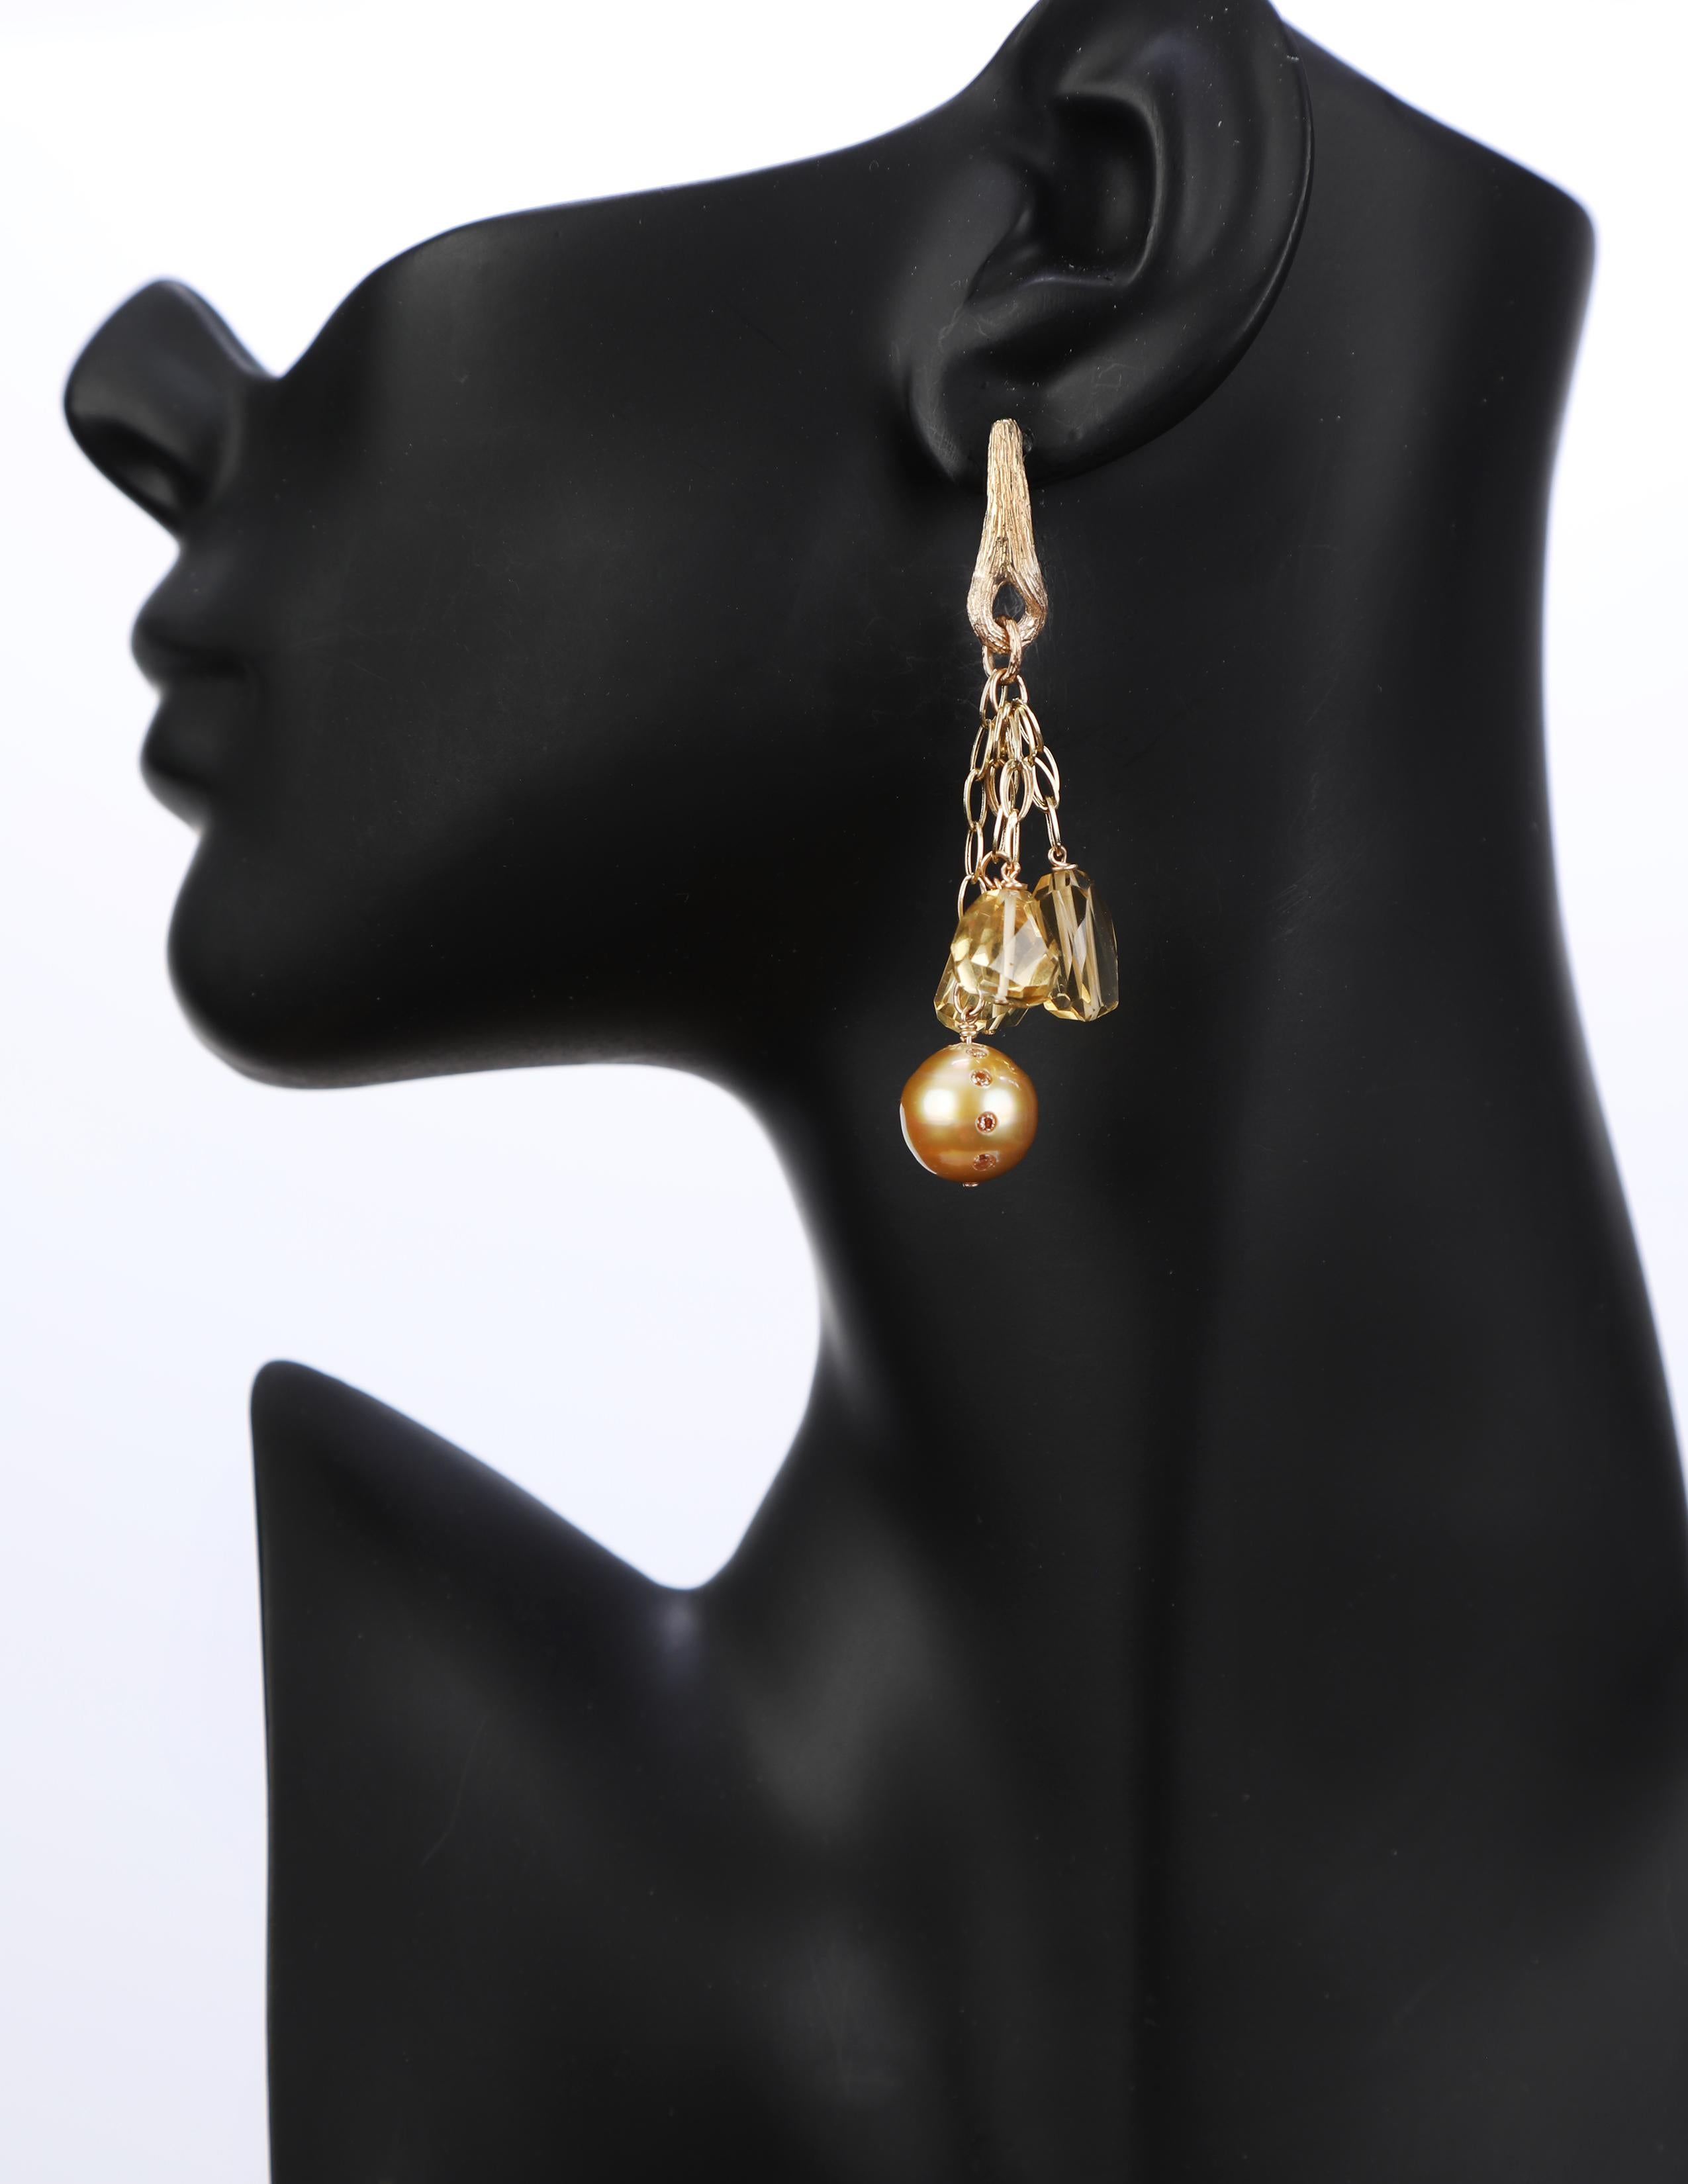 Contemporary WOS Gold Drop Earrings South Sea Pearls Diamonds Citrine Gold